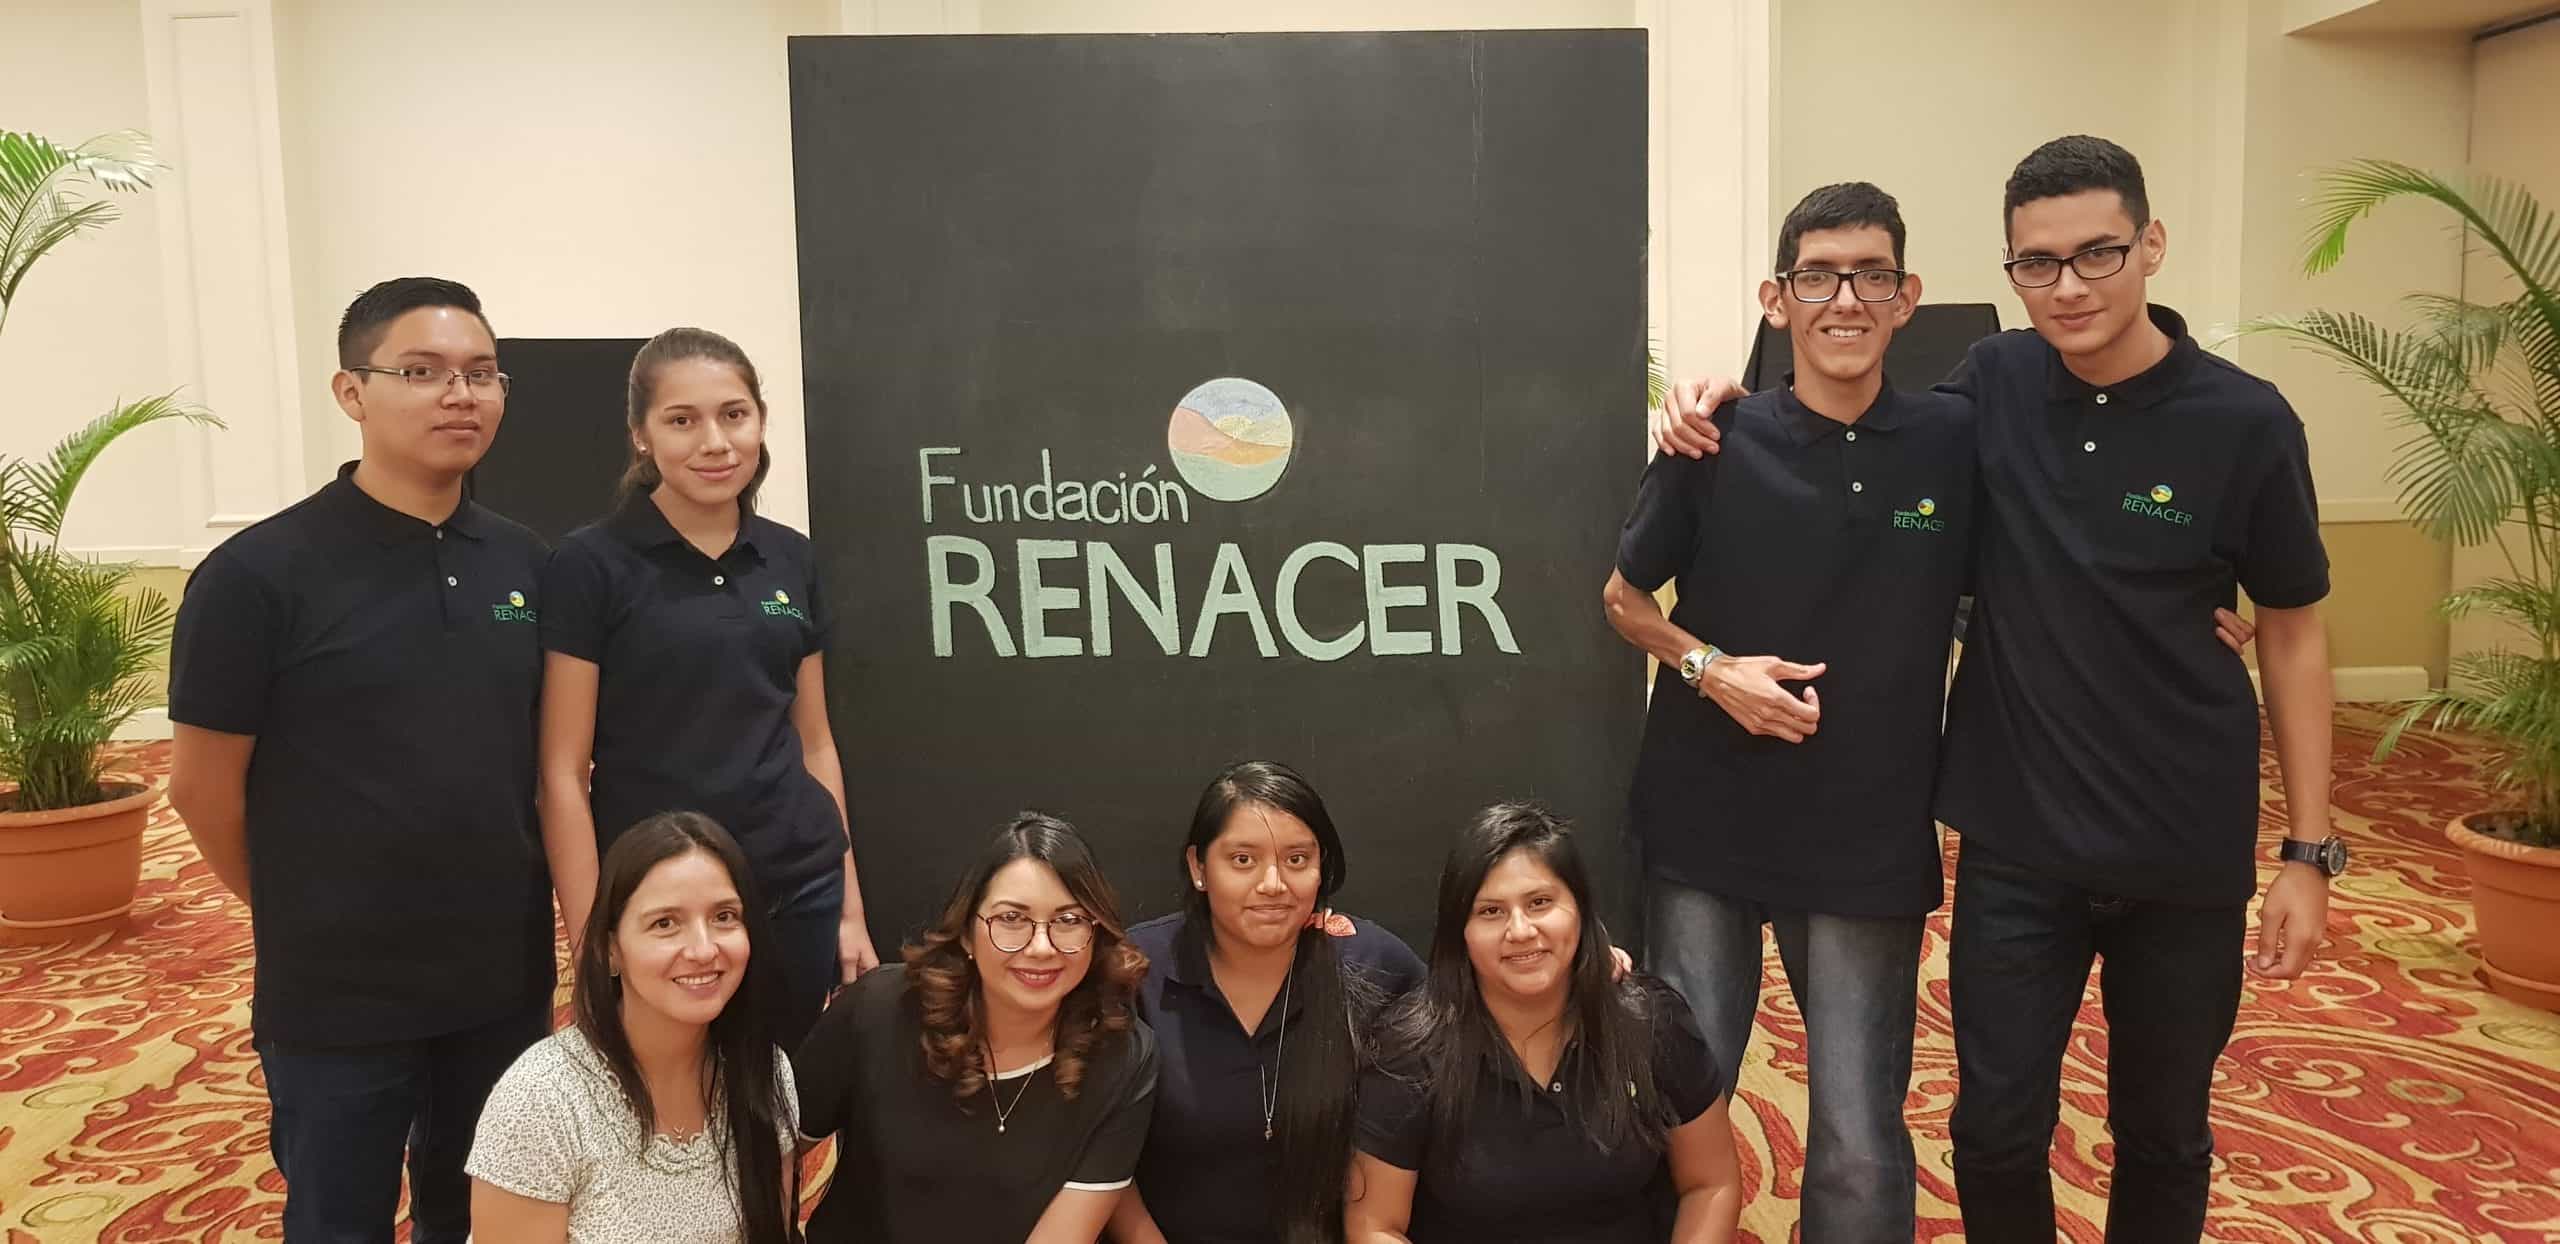 Raúl (second from right) and fellow COAR students at their graduation from the Fundación Renacer high school internship program - 2019